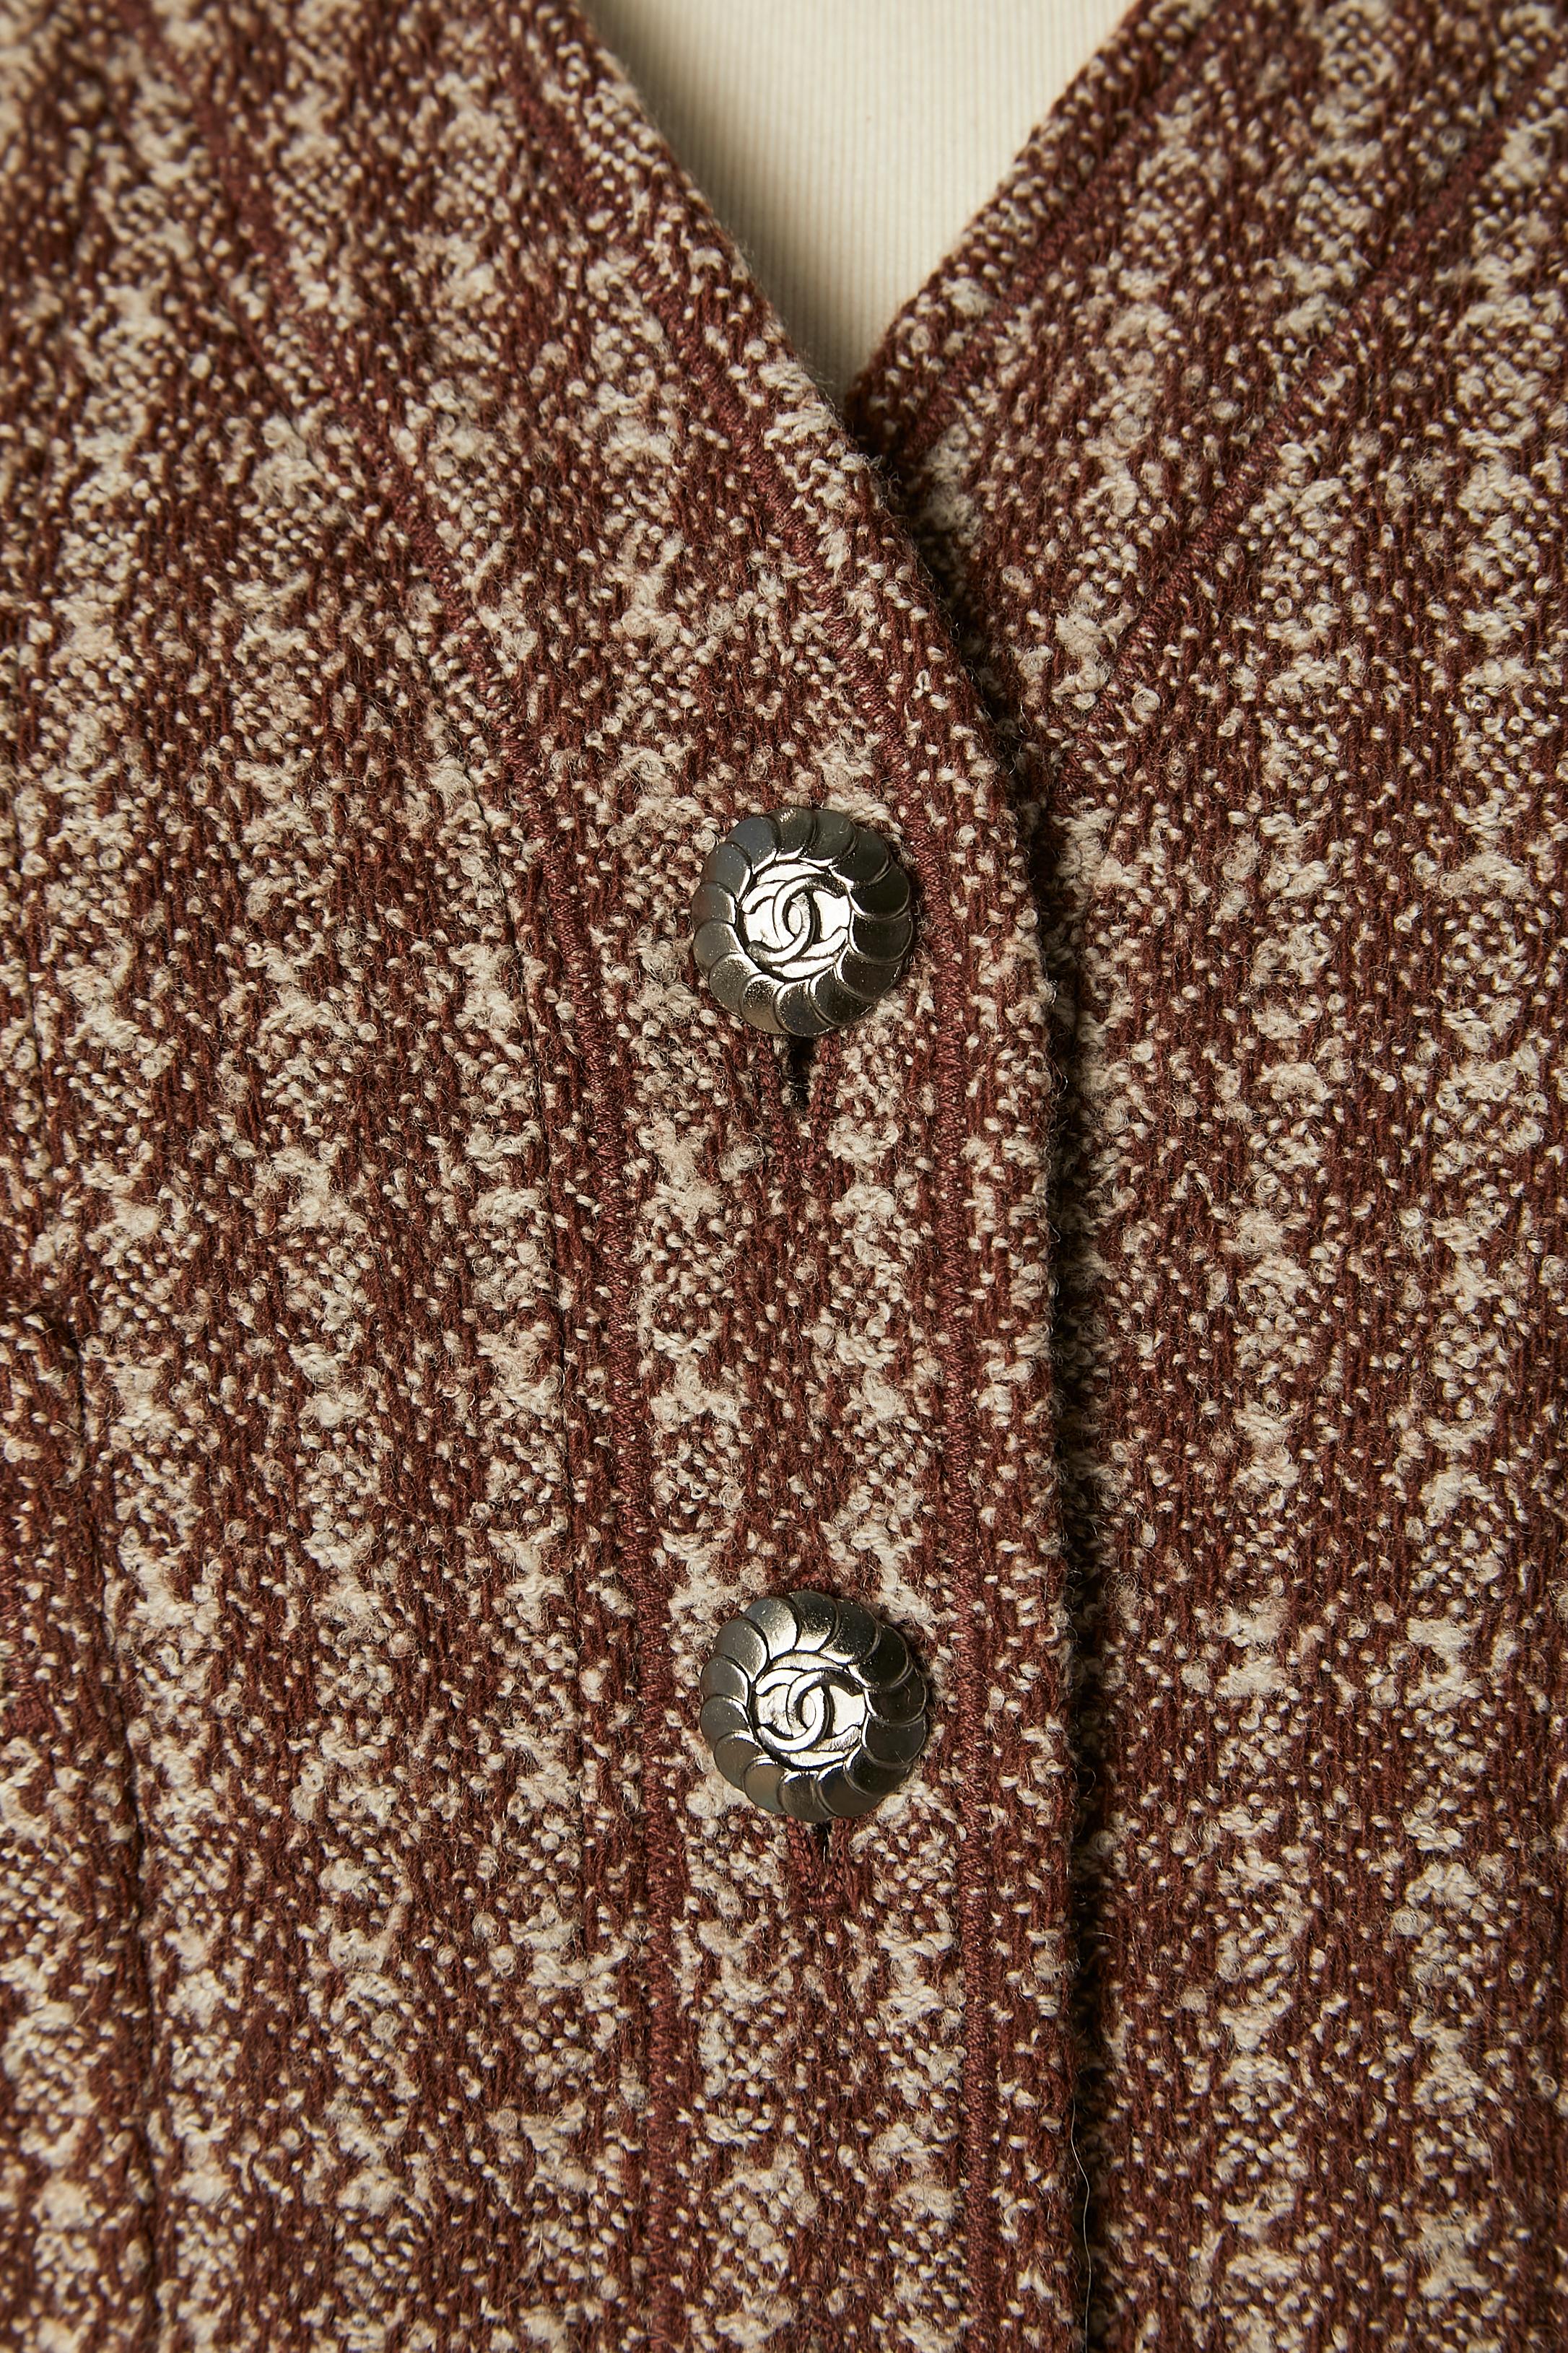 Brown tweed skirt-suit with pleated skirt . Fabric composition: 90% wool, 10% nylon. Lining: 95% silk, 5% lycra. Branded 